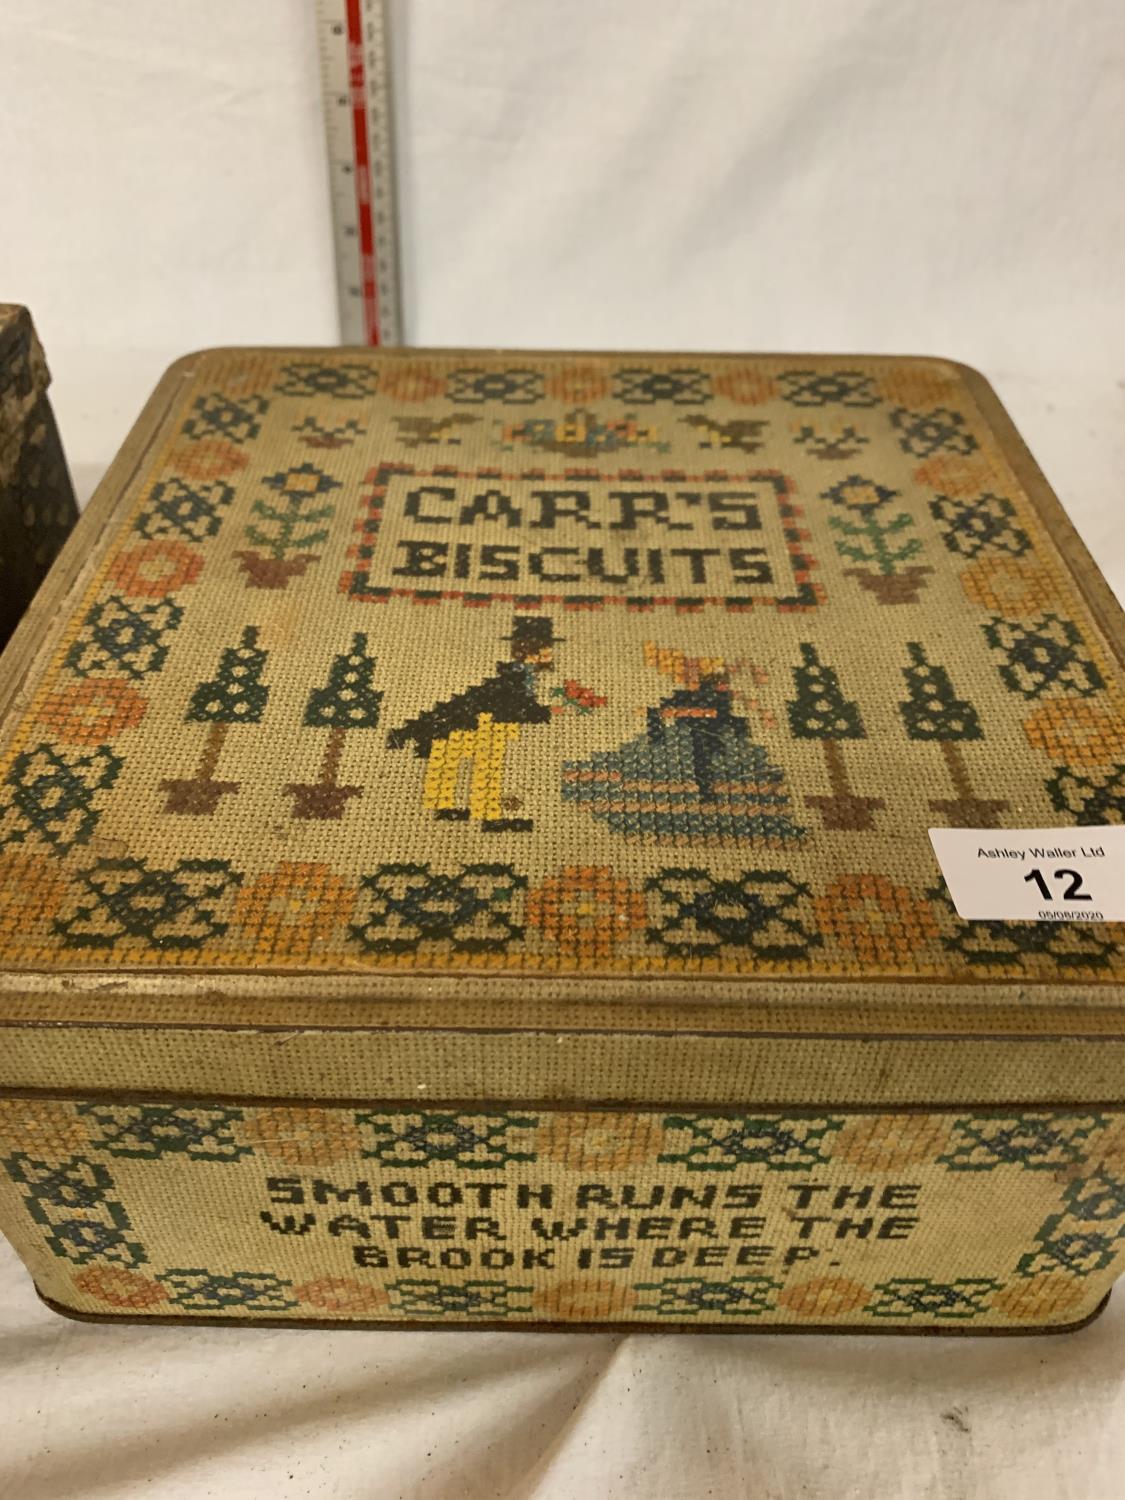 TWO ORIGINAL VINTAGE TINS TO INCLUDE JACOBS CREAM CRACKERS AND CARR'S BISCUITS - Image 5 of 12